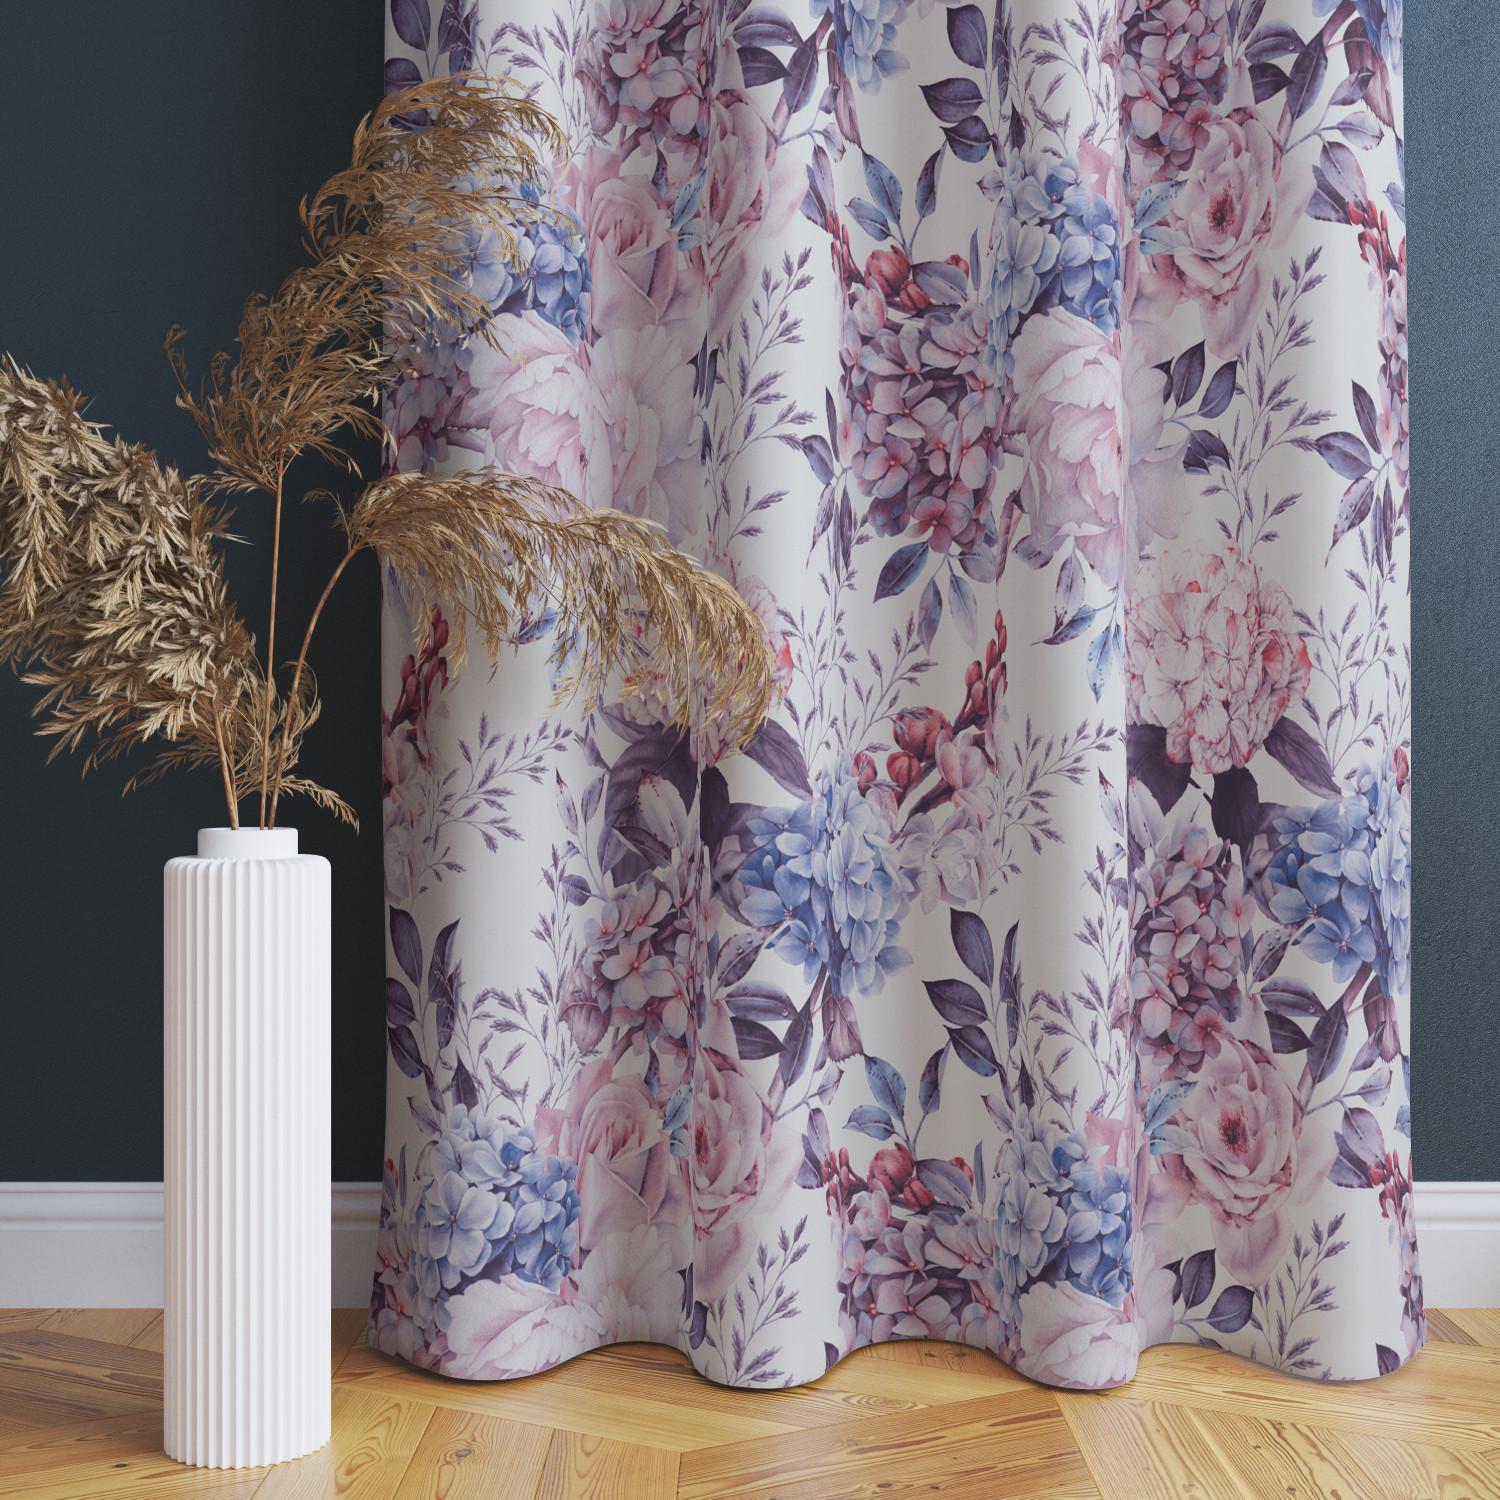 Decorative Curtain Spring arrangement - flowers in shades of pink and blue